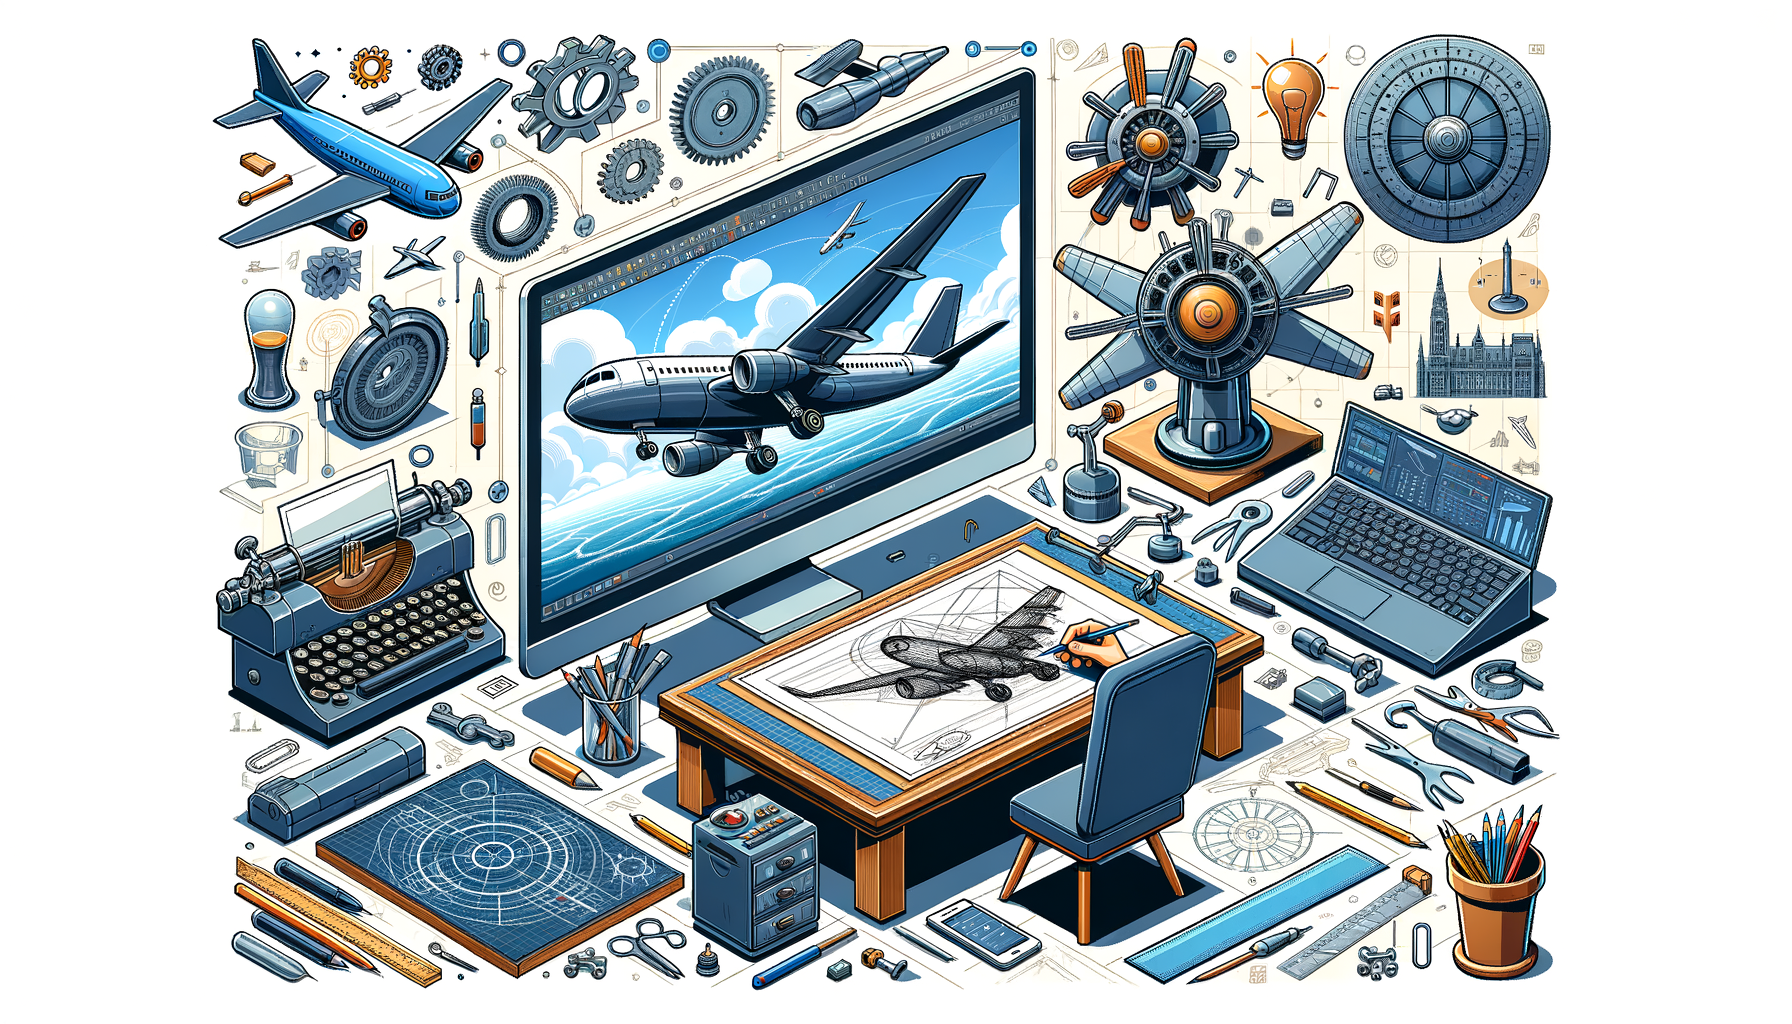 Design Software History: How CATIA Revolutionized Aerospace Engineering: A Historical Perspective